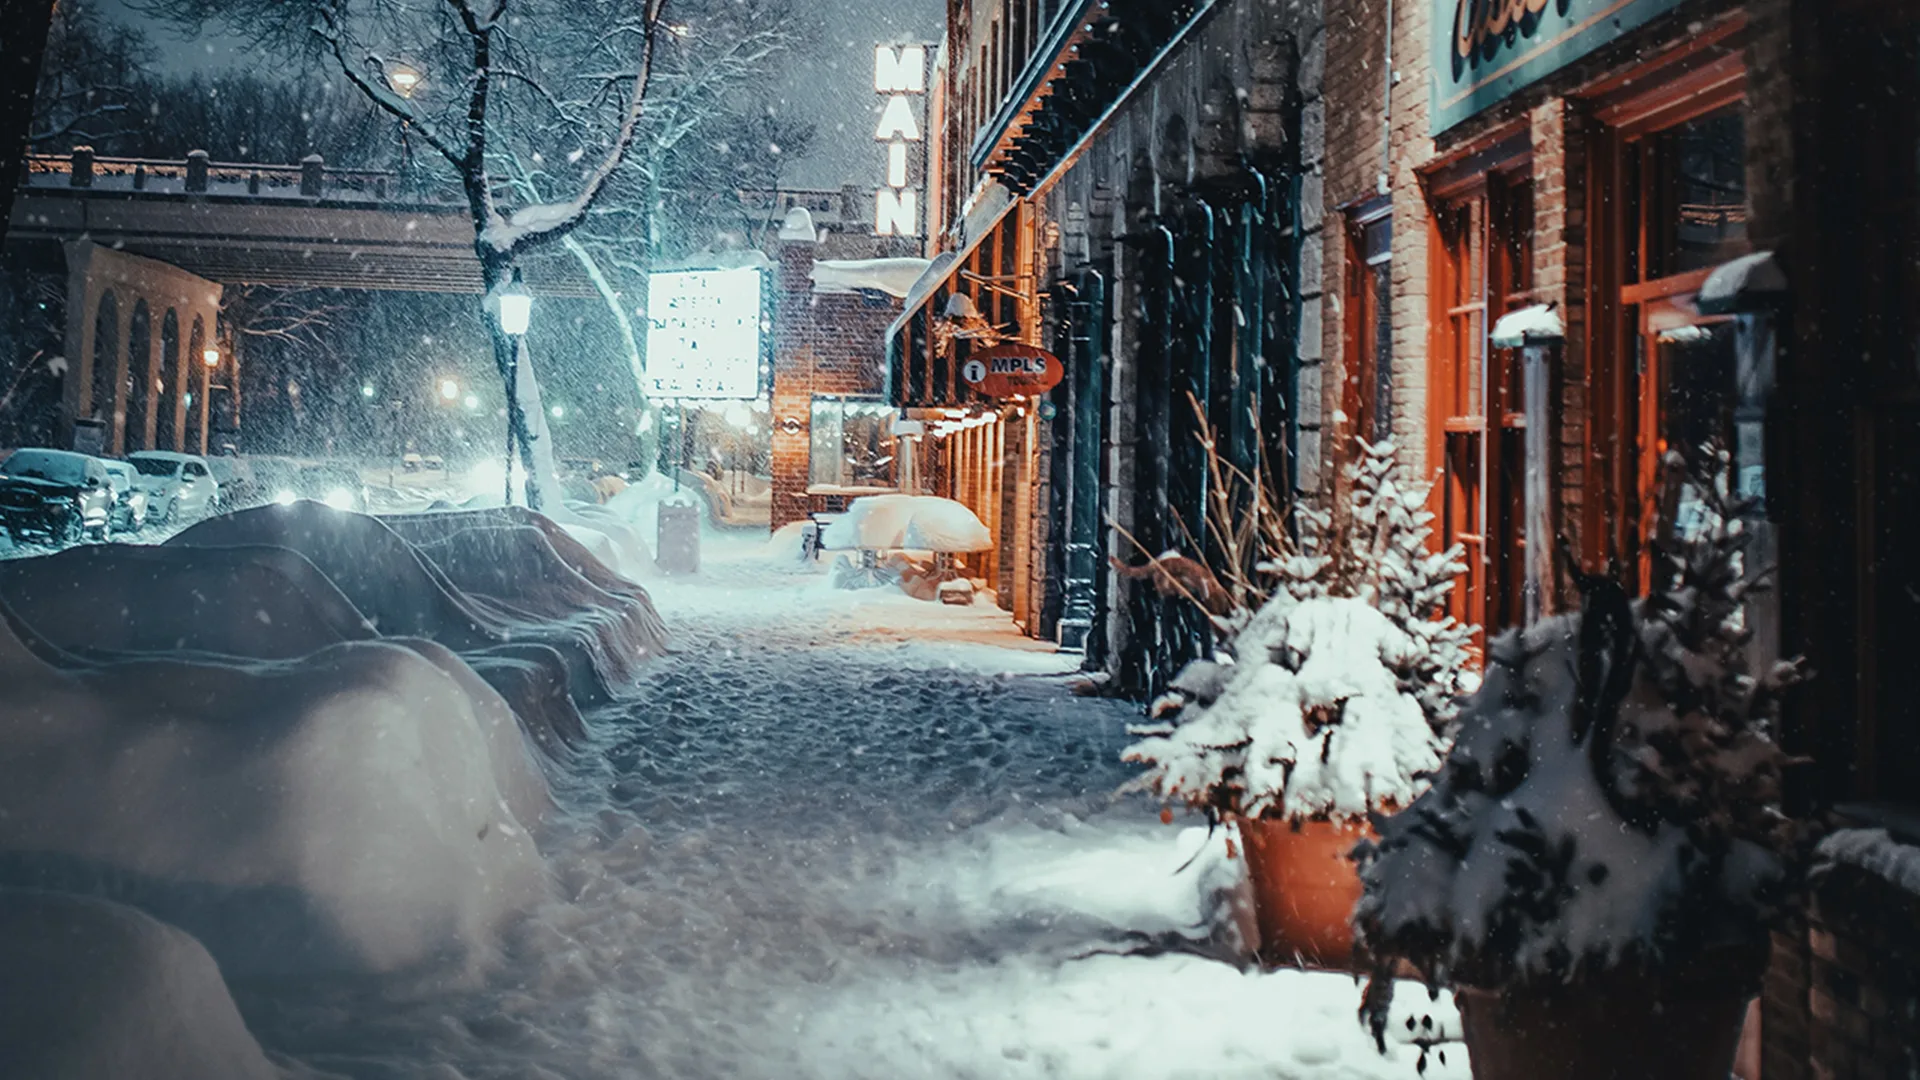 New York street in the snow at night